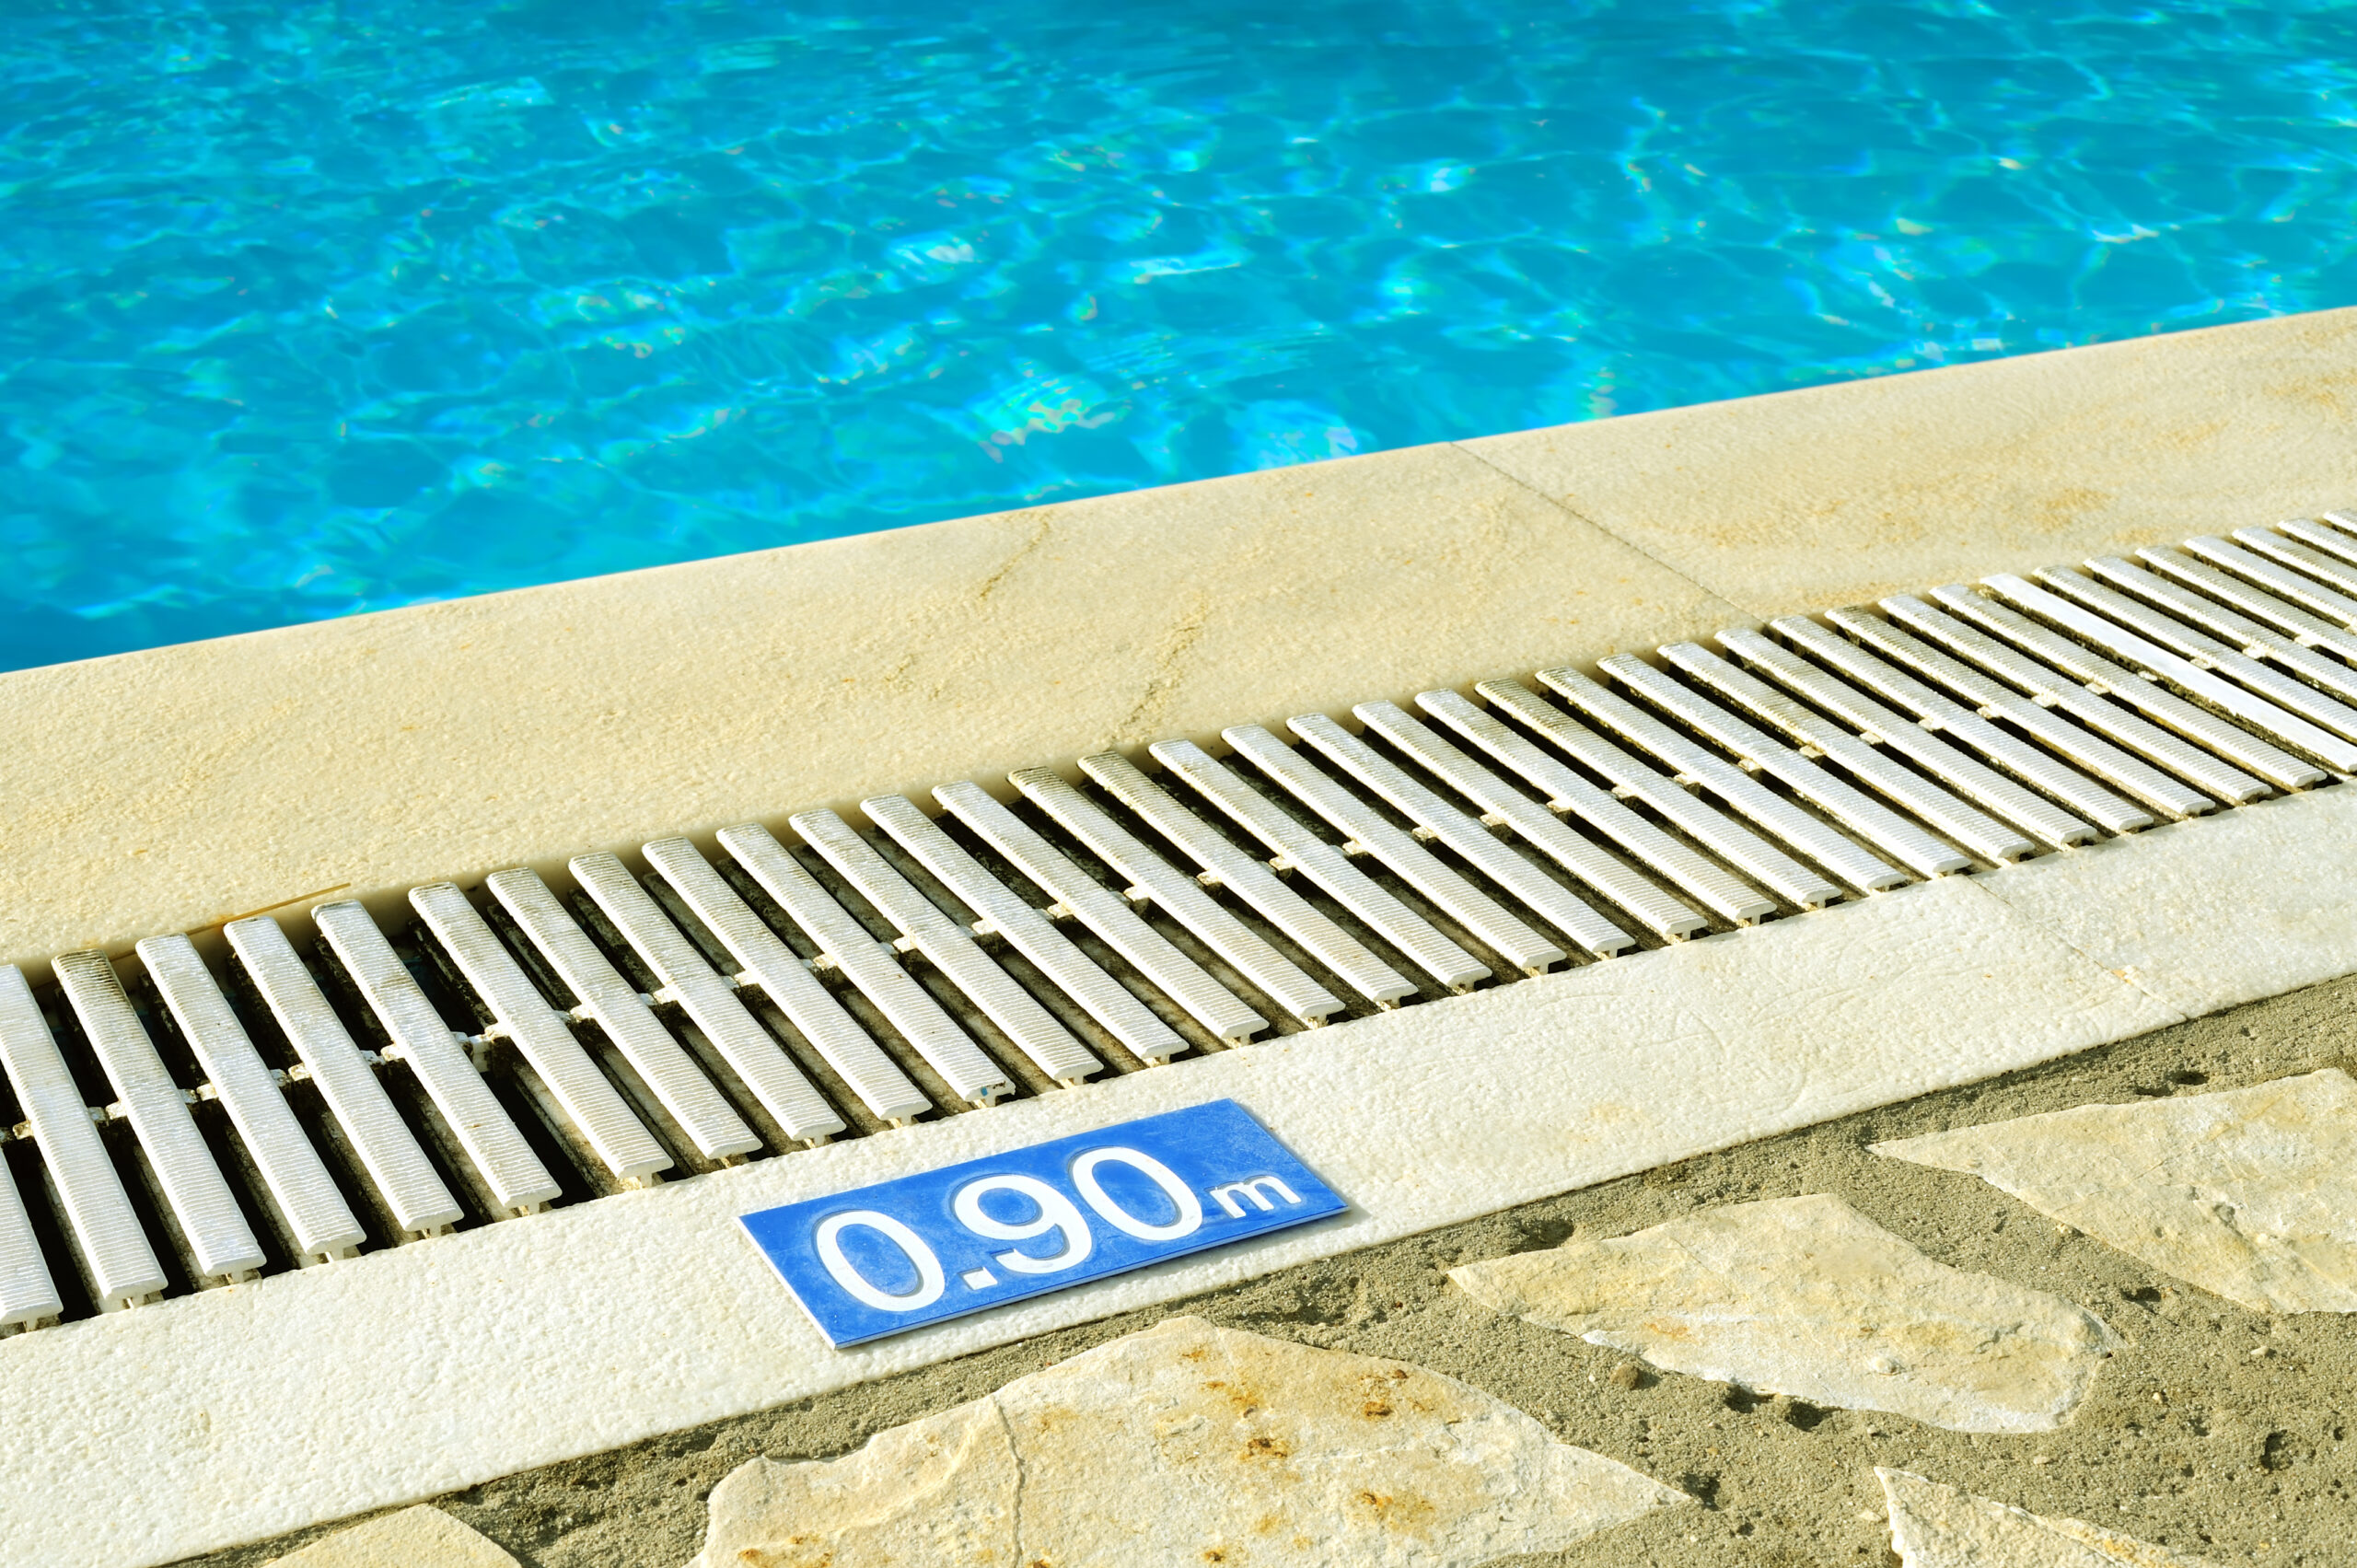 The edge of a pool with depth information, typically displayed on the pool's wall or edge to inform swimmers of the water depth.